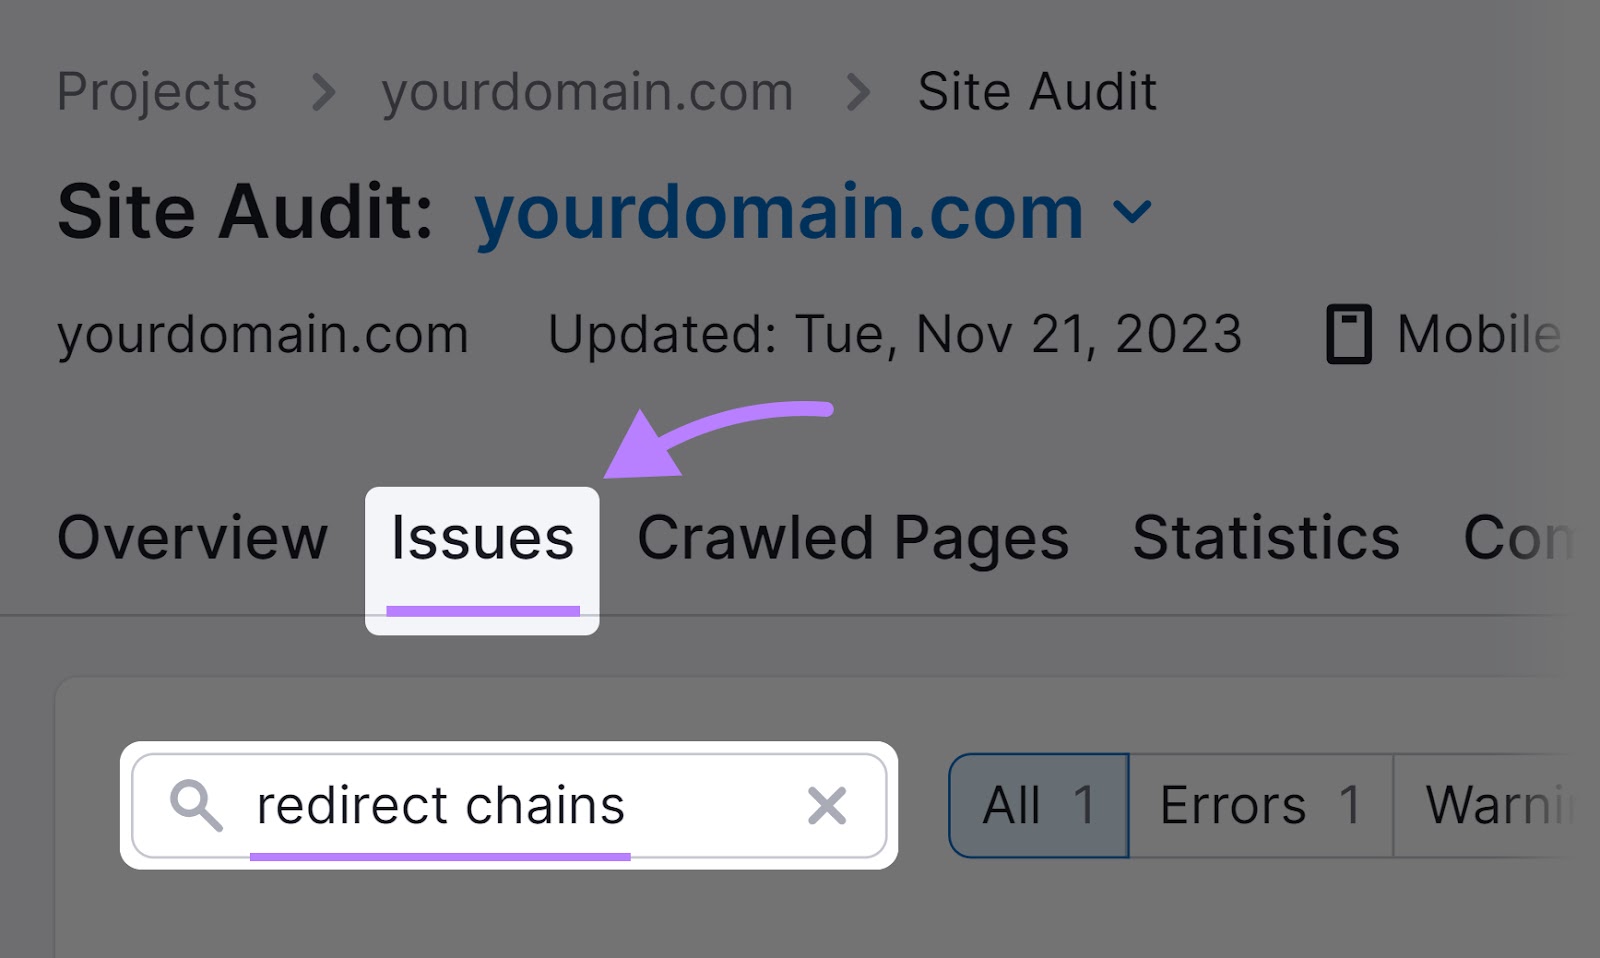 “redirect chains” entered in the search bar under "Issues" tab